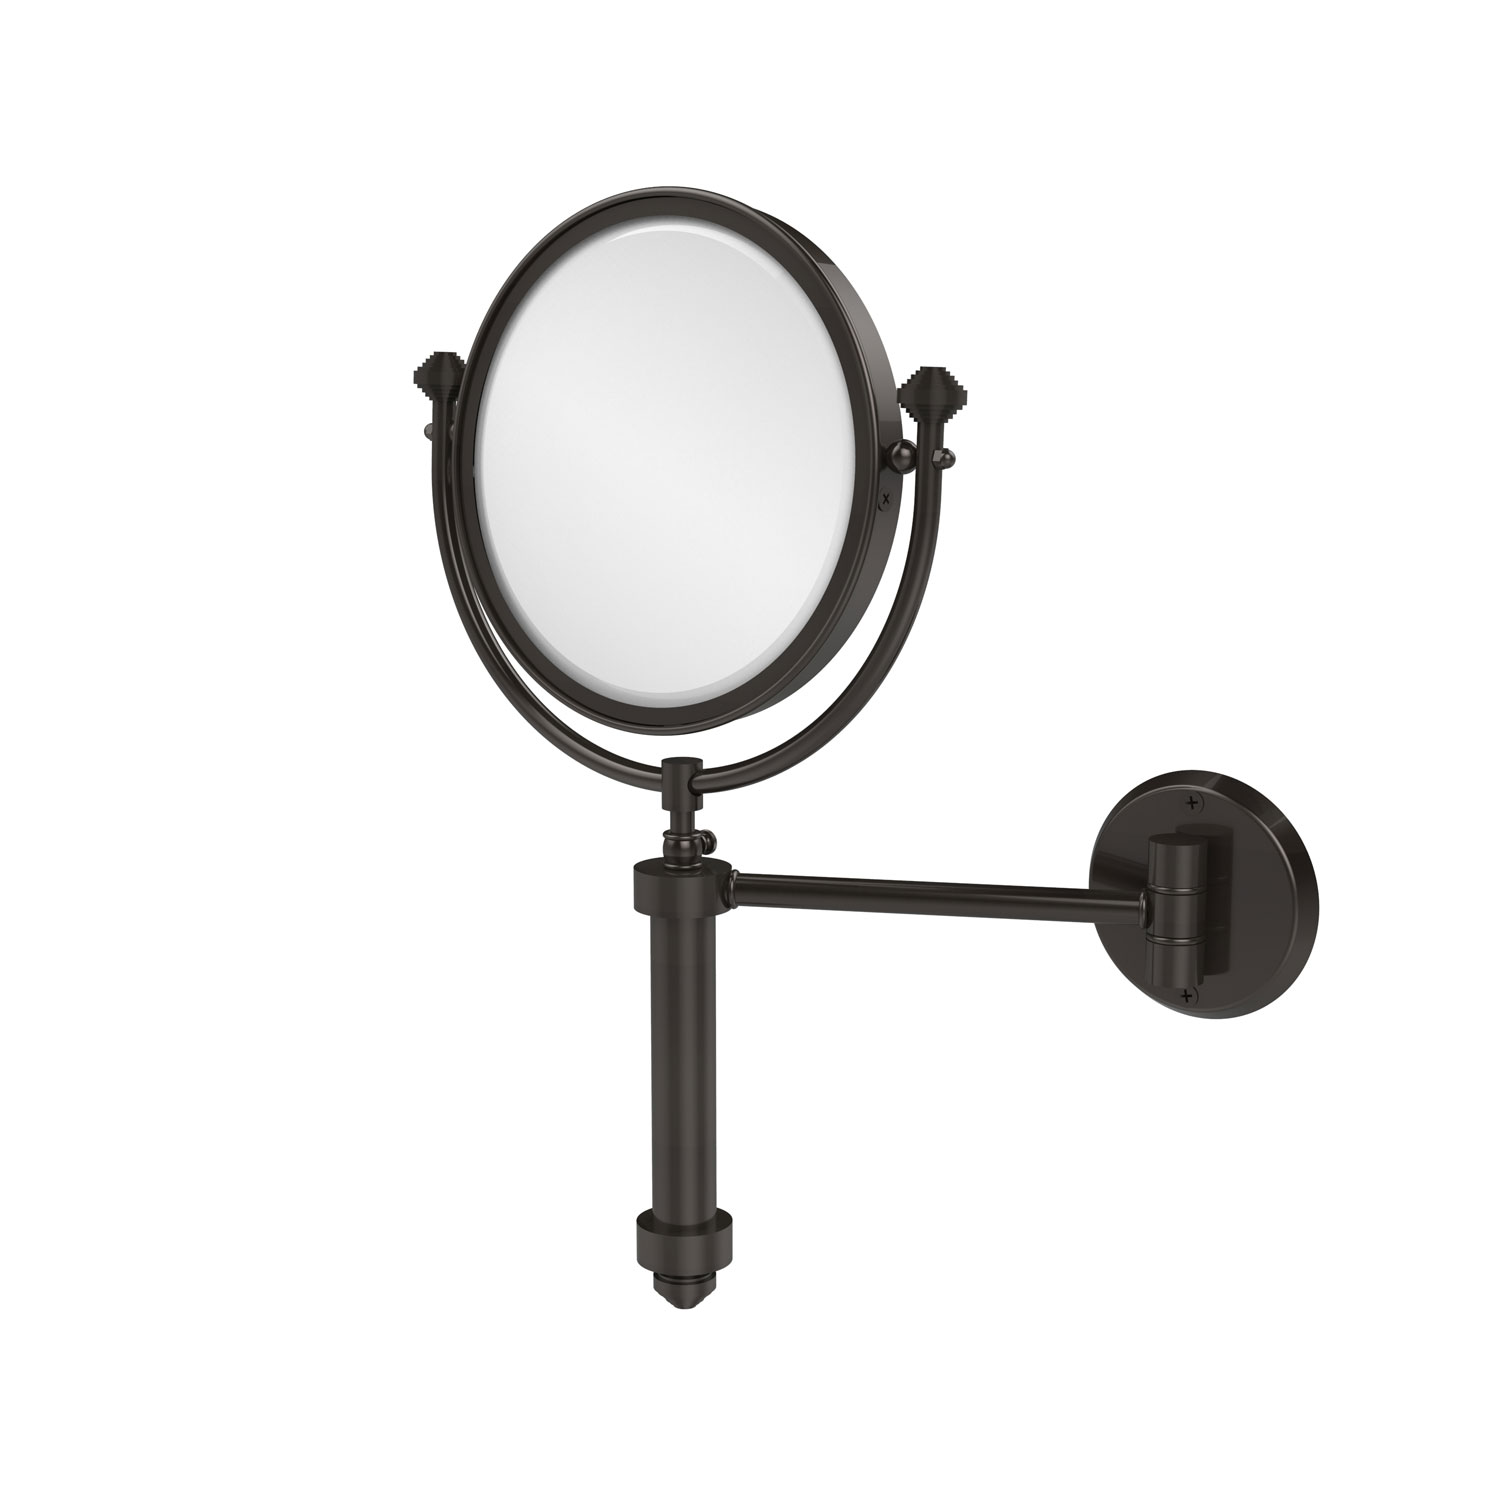 Southbeach Collection Wall Mounted Make-Up Mirror 8 Inch Diameter With 3X Magnification, Oil Rubbed Bronze